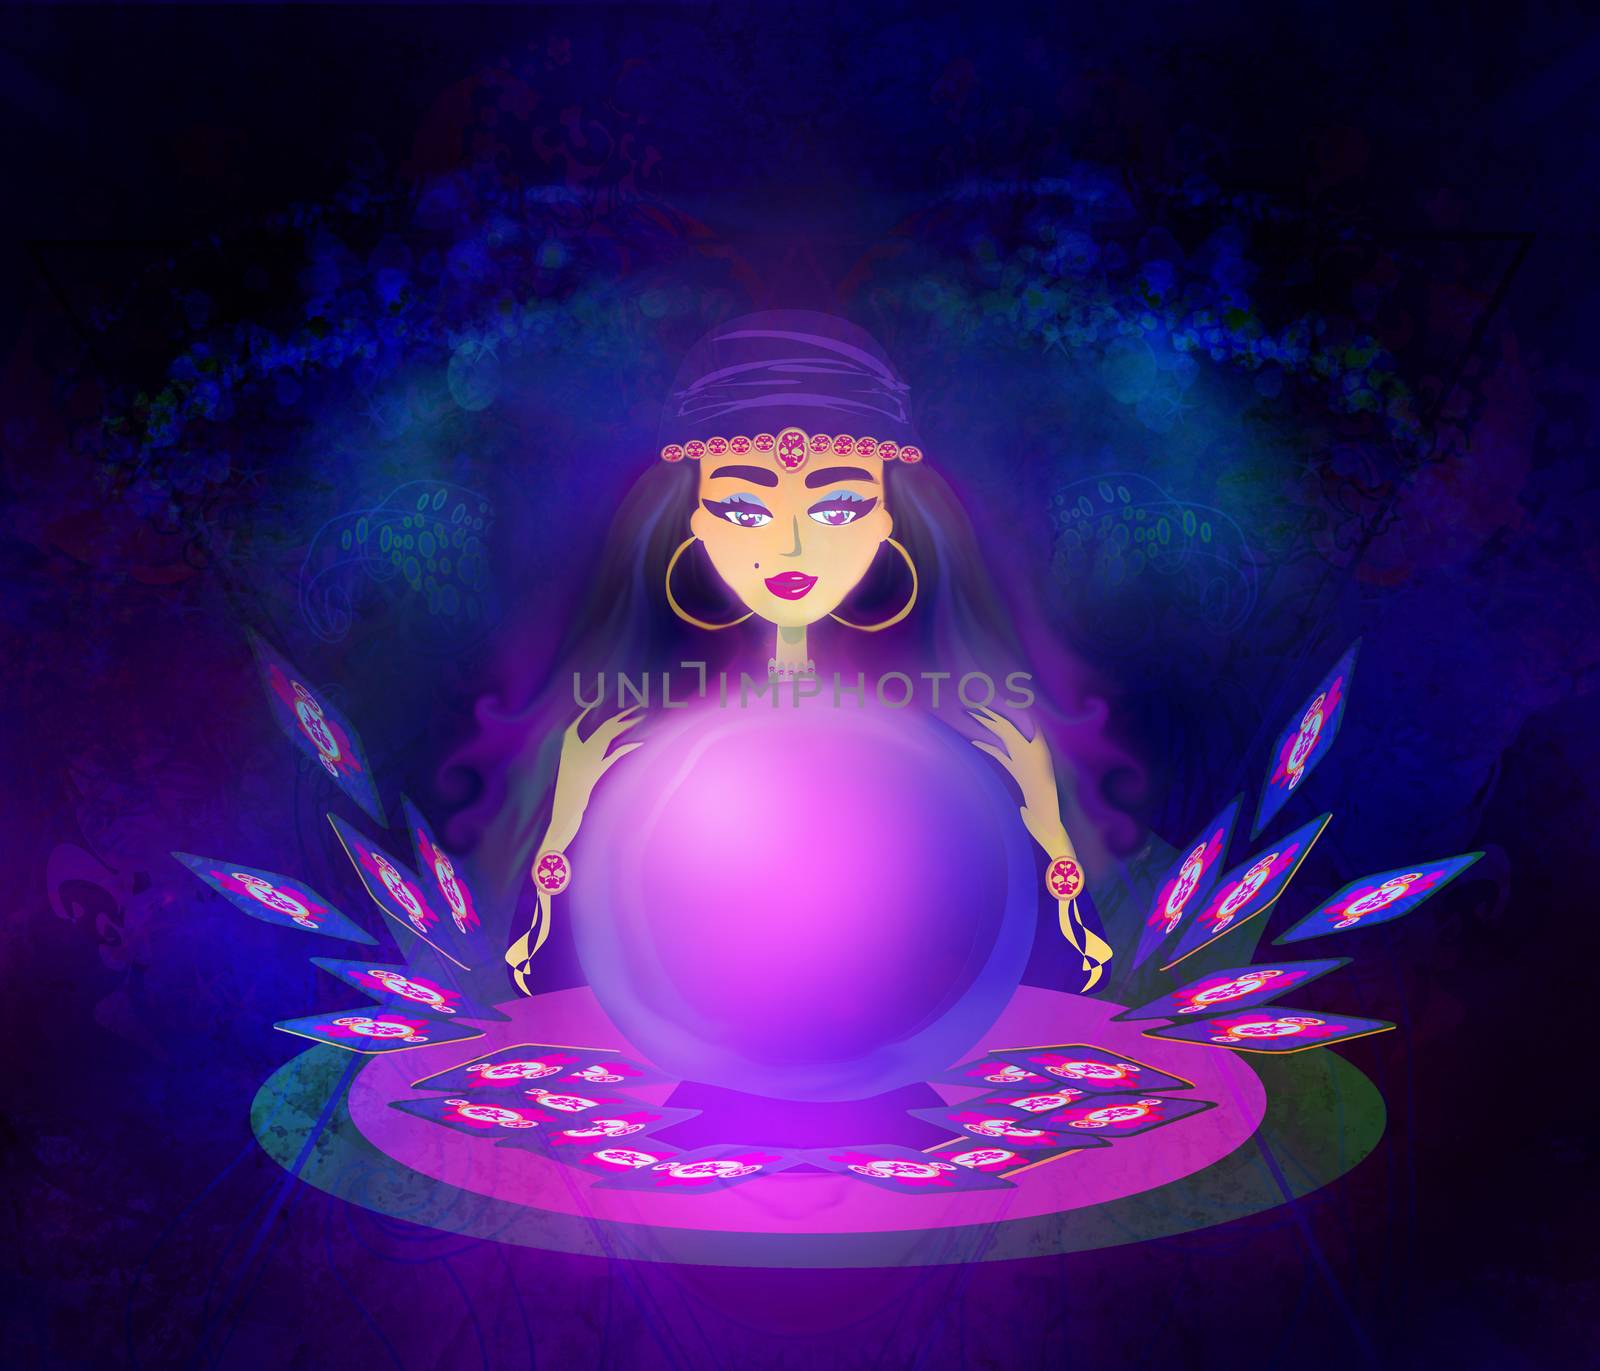 Fortune teller woman with tarot cards and a crystal ball by JackyBrown